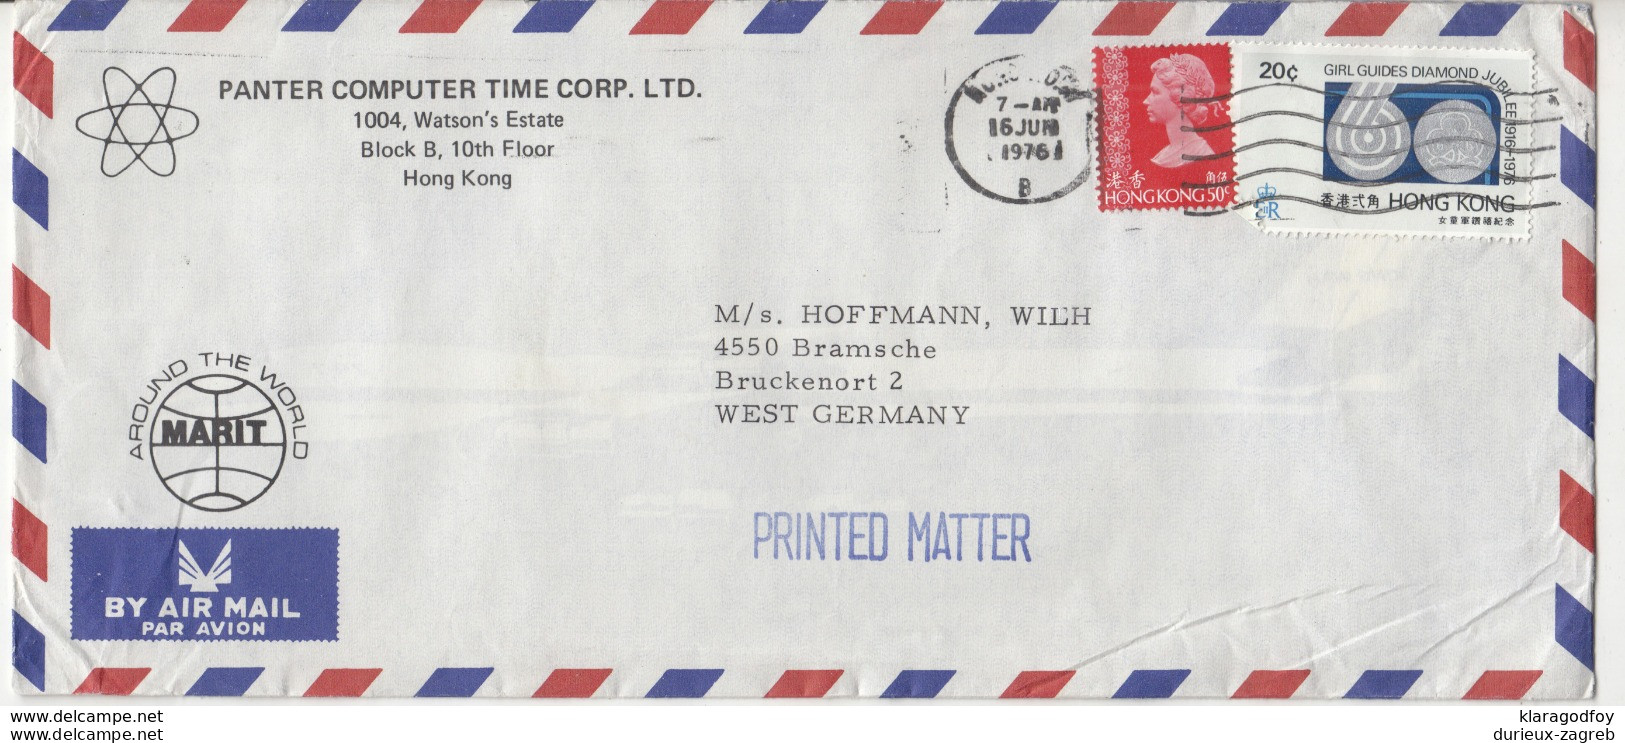 Panter Computer Time Corp. Company Air Mail Letter Cover Travelled 1976 To Germany B190922 - Briefe U. Dokumente